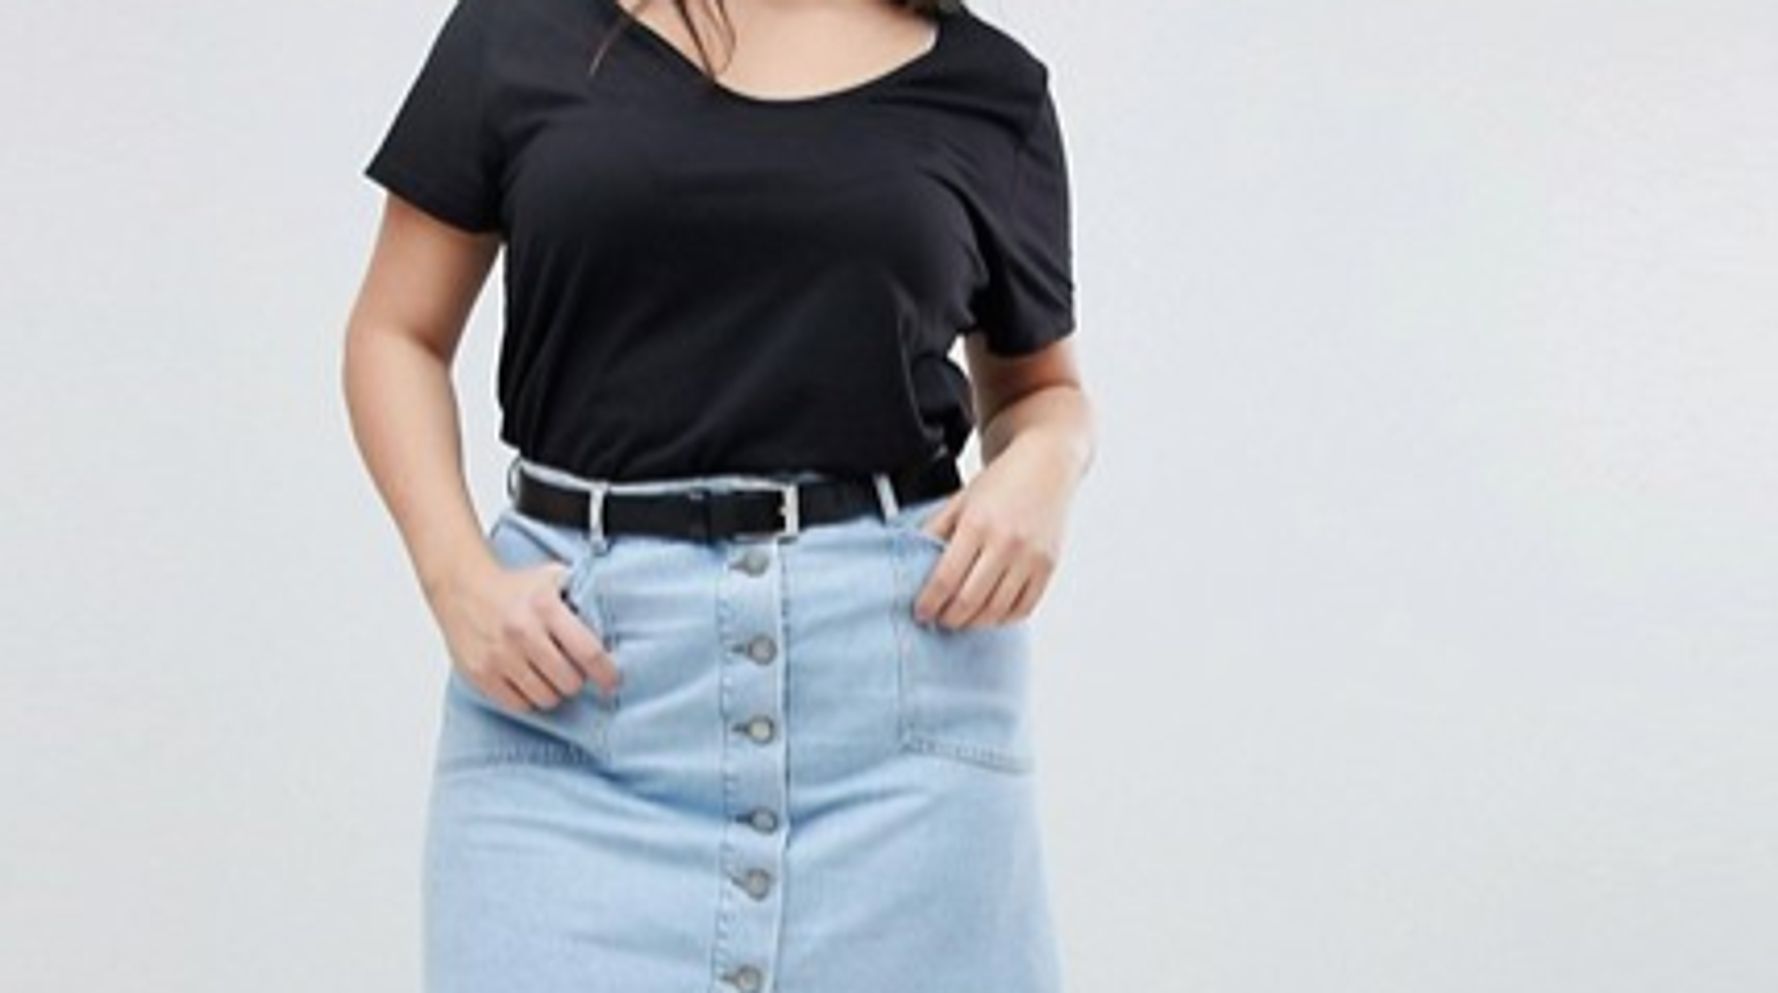 11 Flattering Plus-Size Denim Skirts For Women With Curves